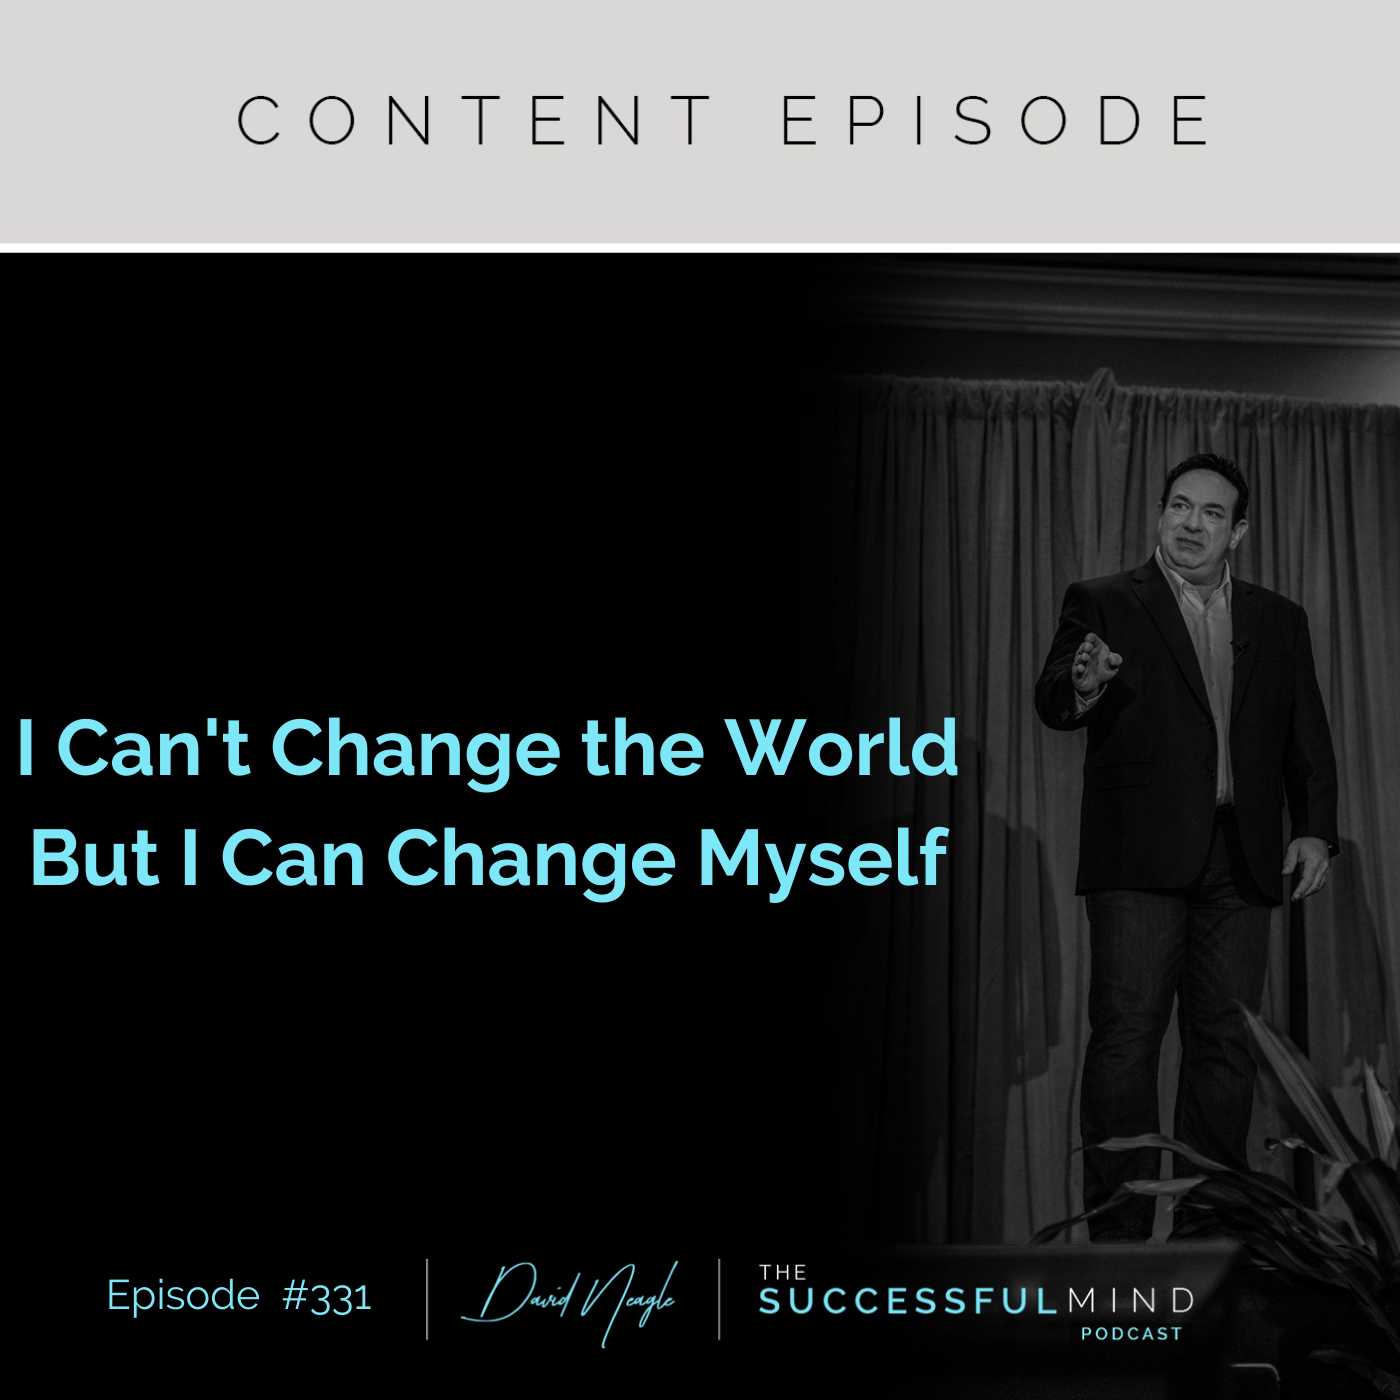 The Successful Mind Podcast - Episode 331 - I Can’t Change the World But I Can Change Myself